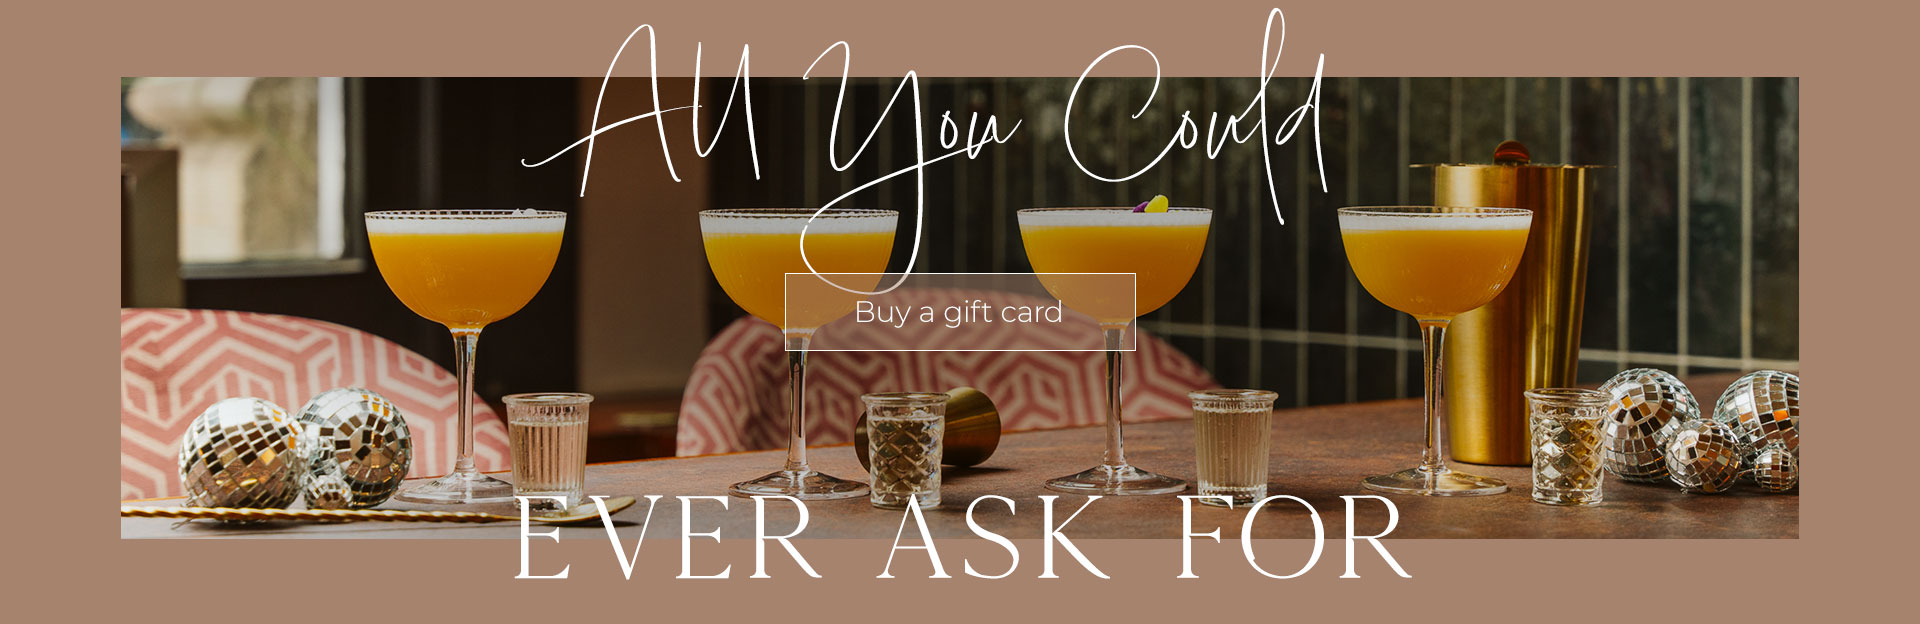 All Bar One Gift Cards at All Bar One Cannon Street